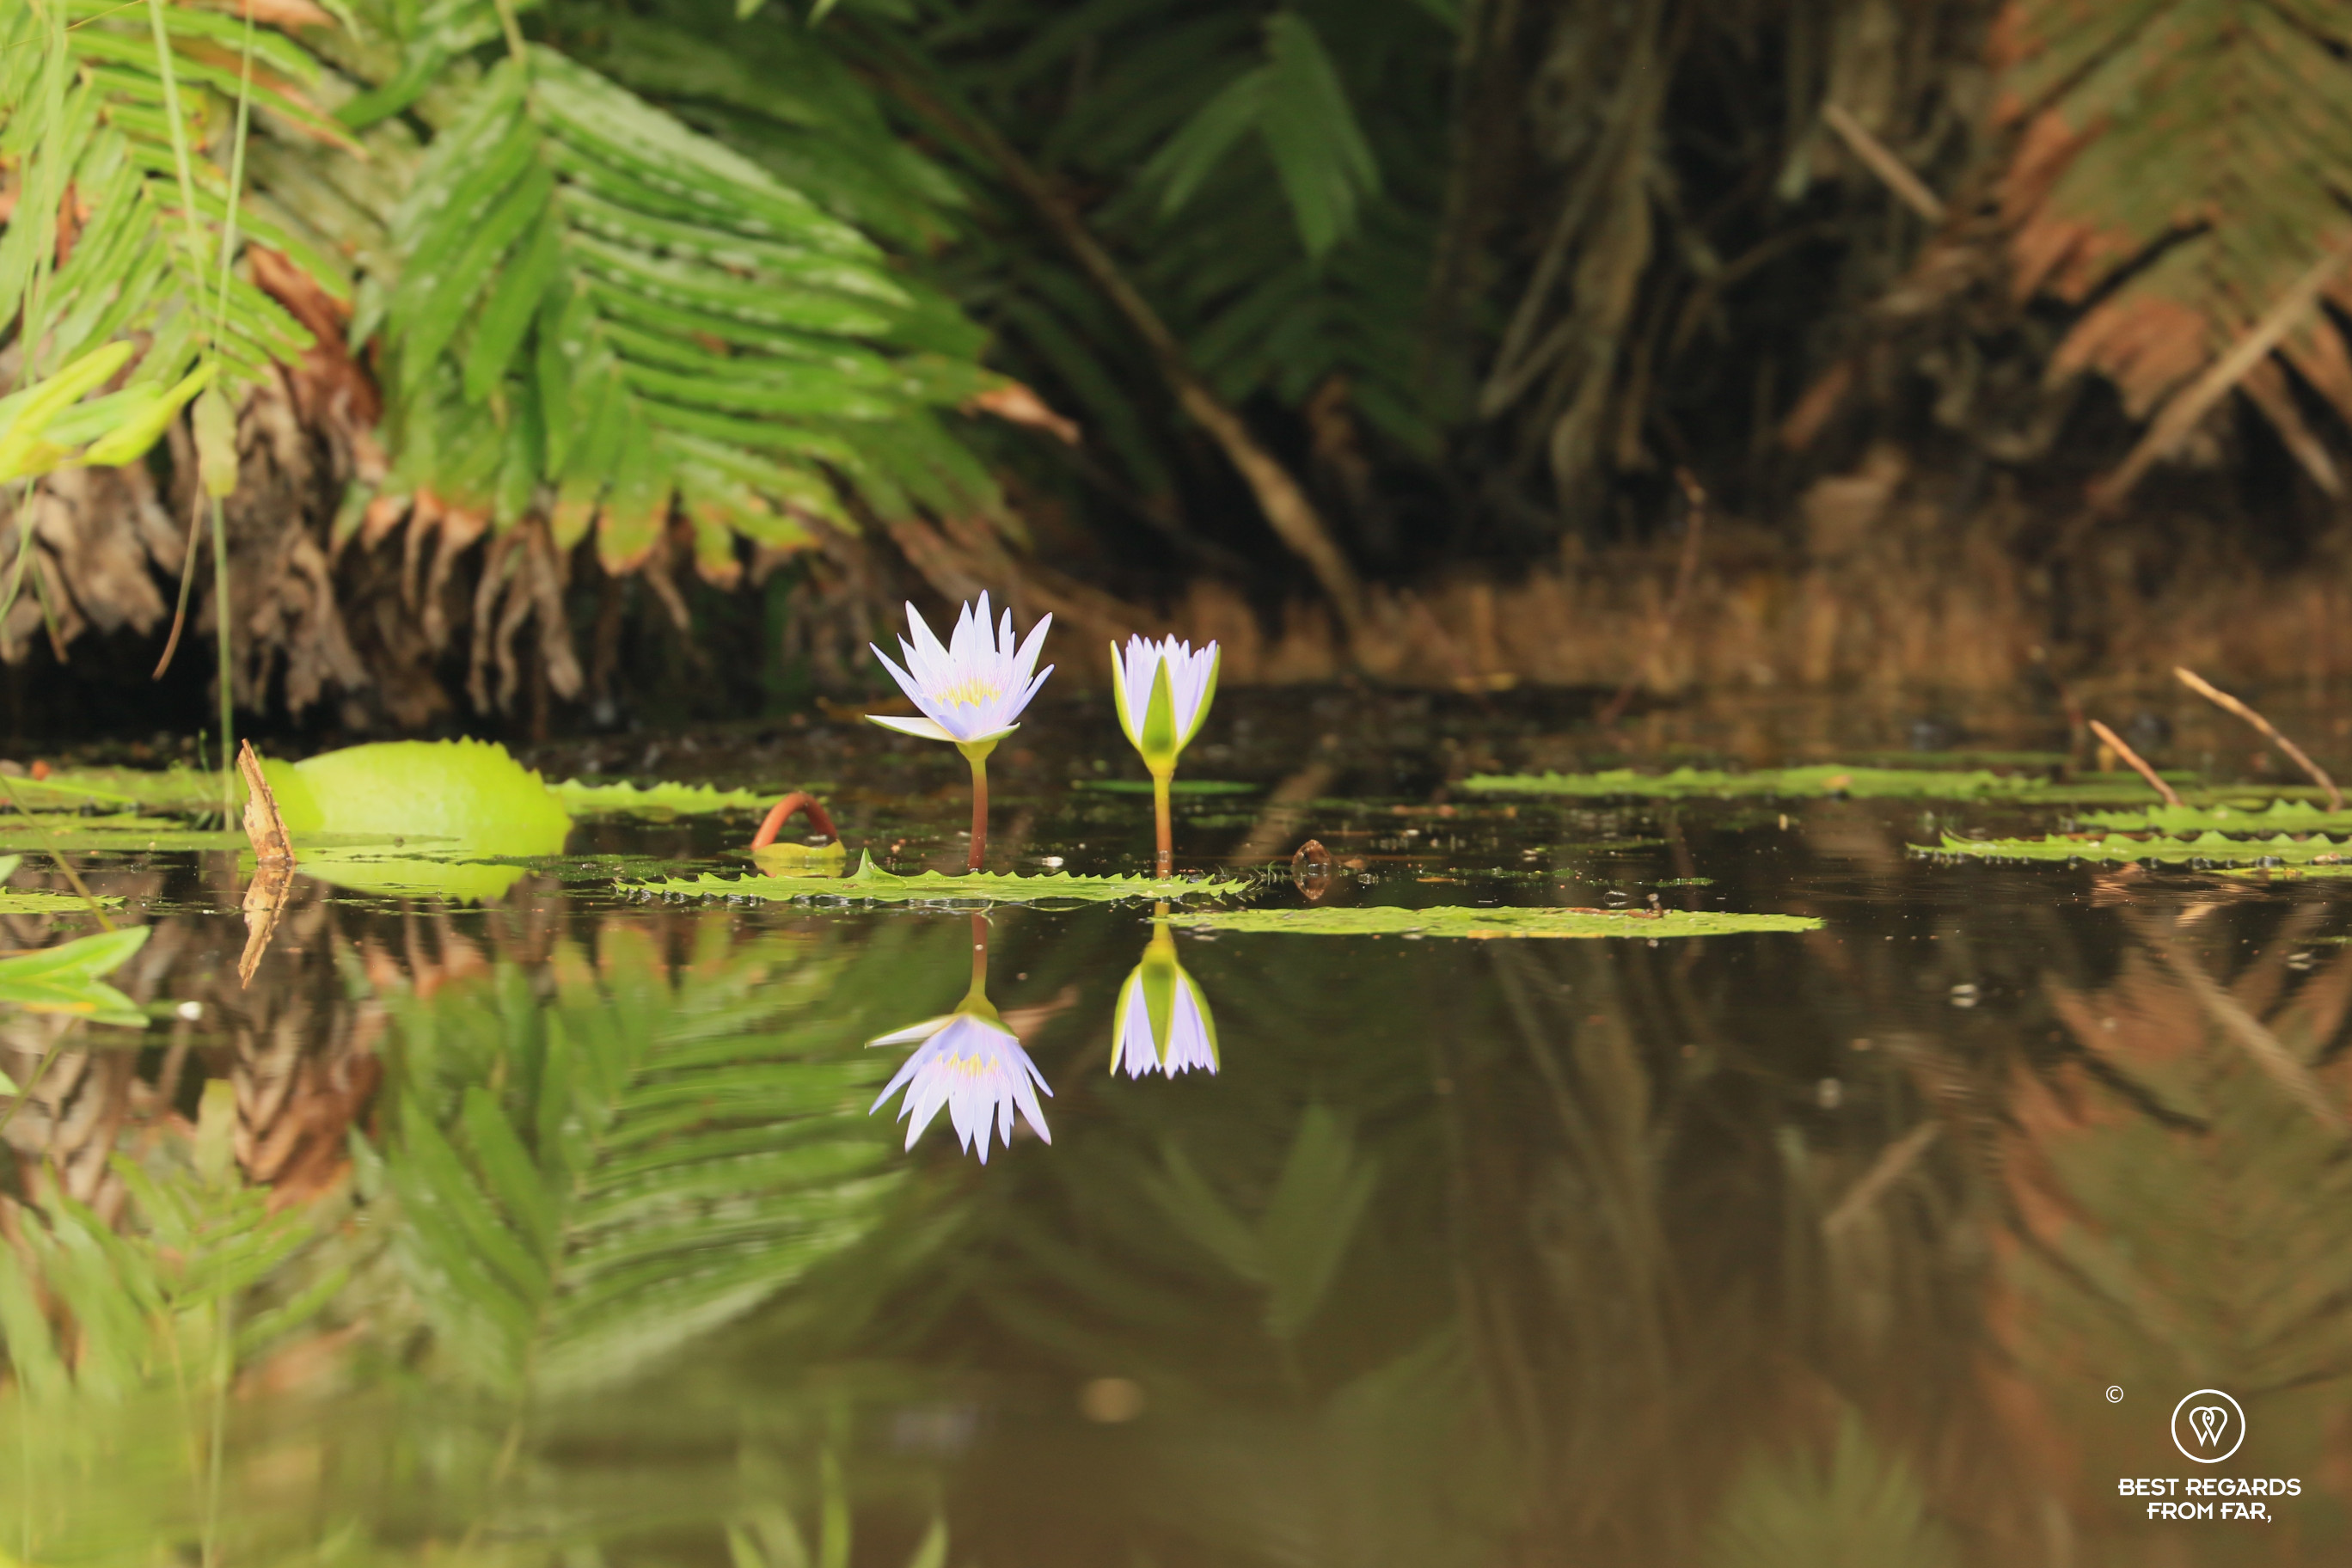 Two waterlilies reflected in the lake of Kosi Bay, South Africa